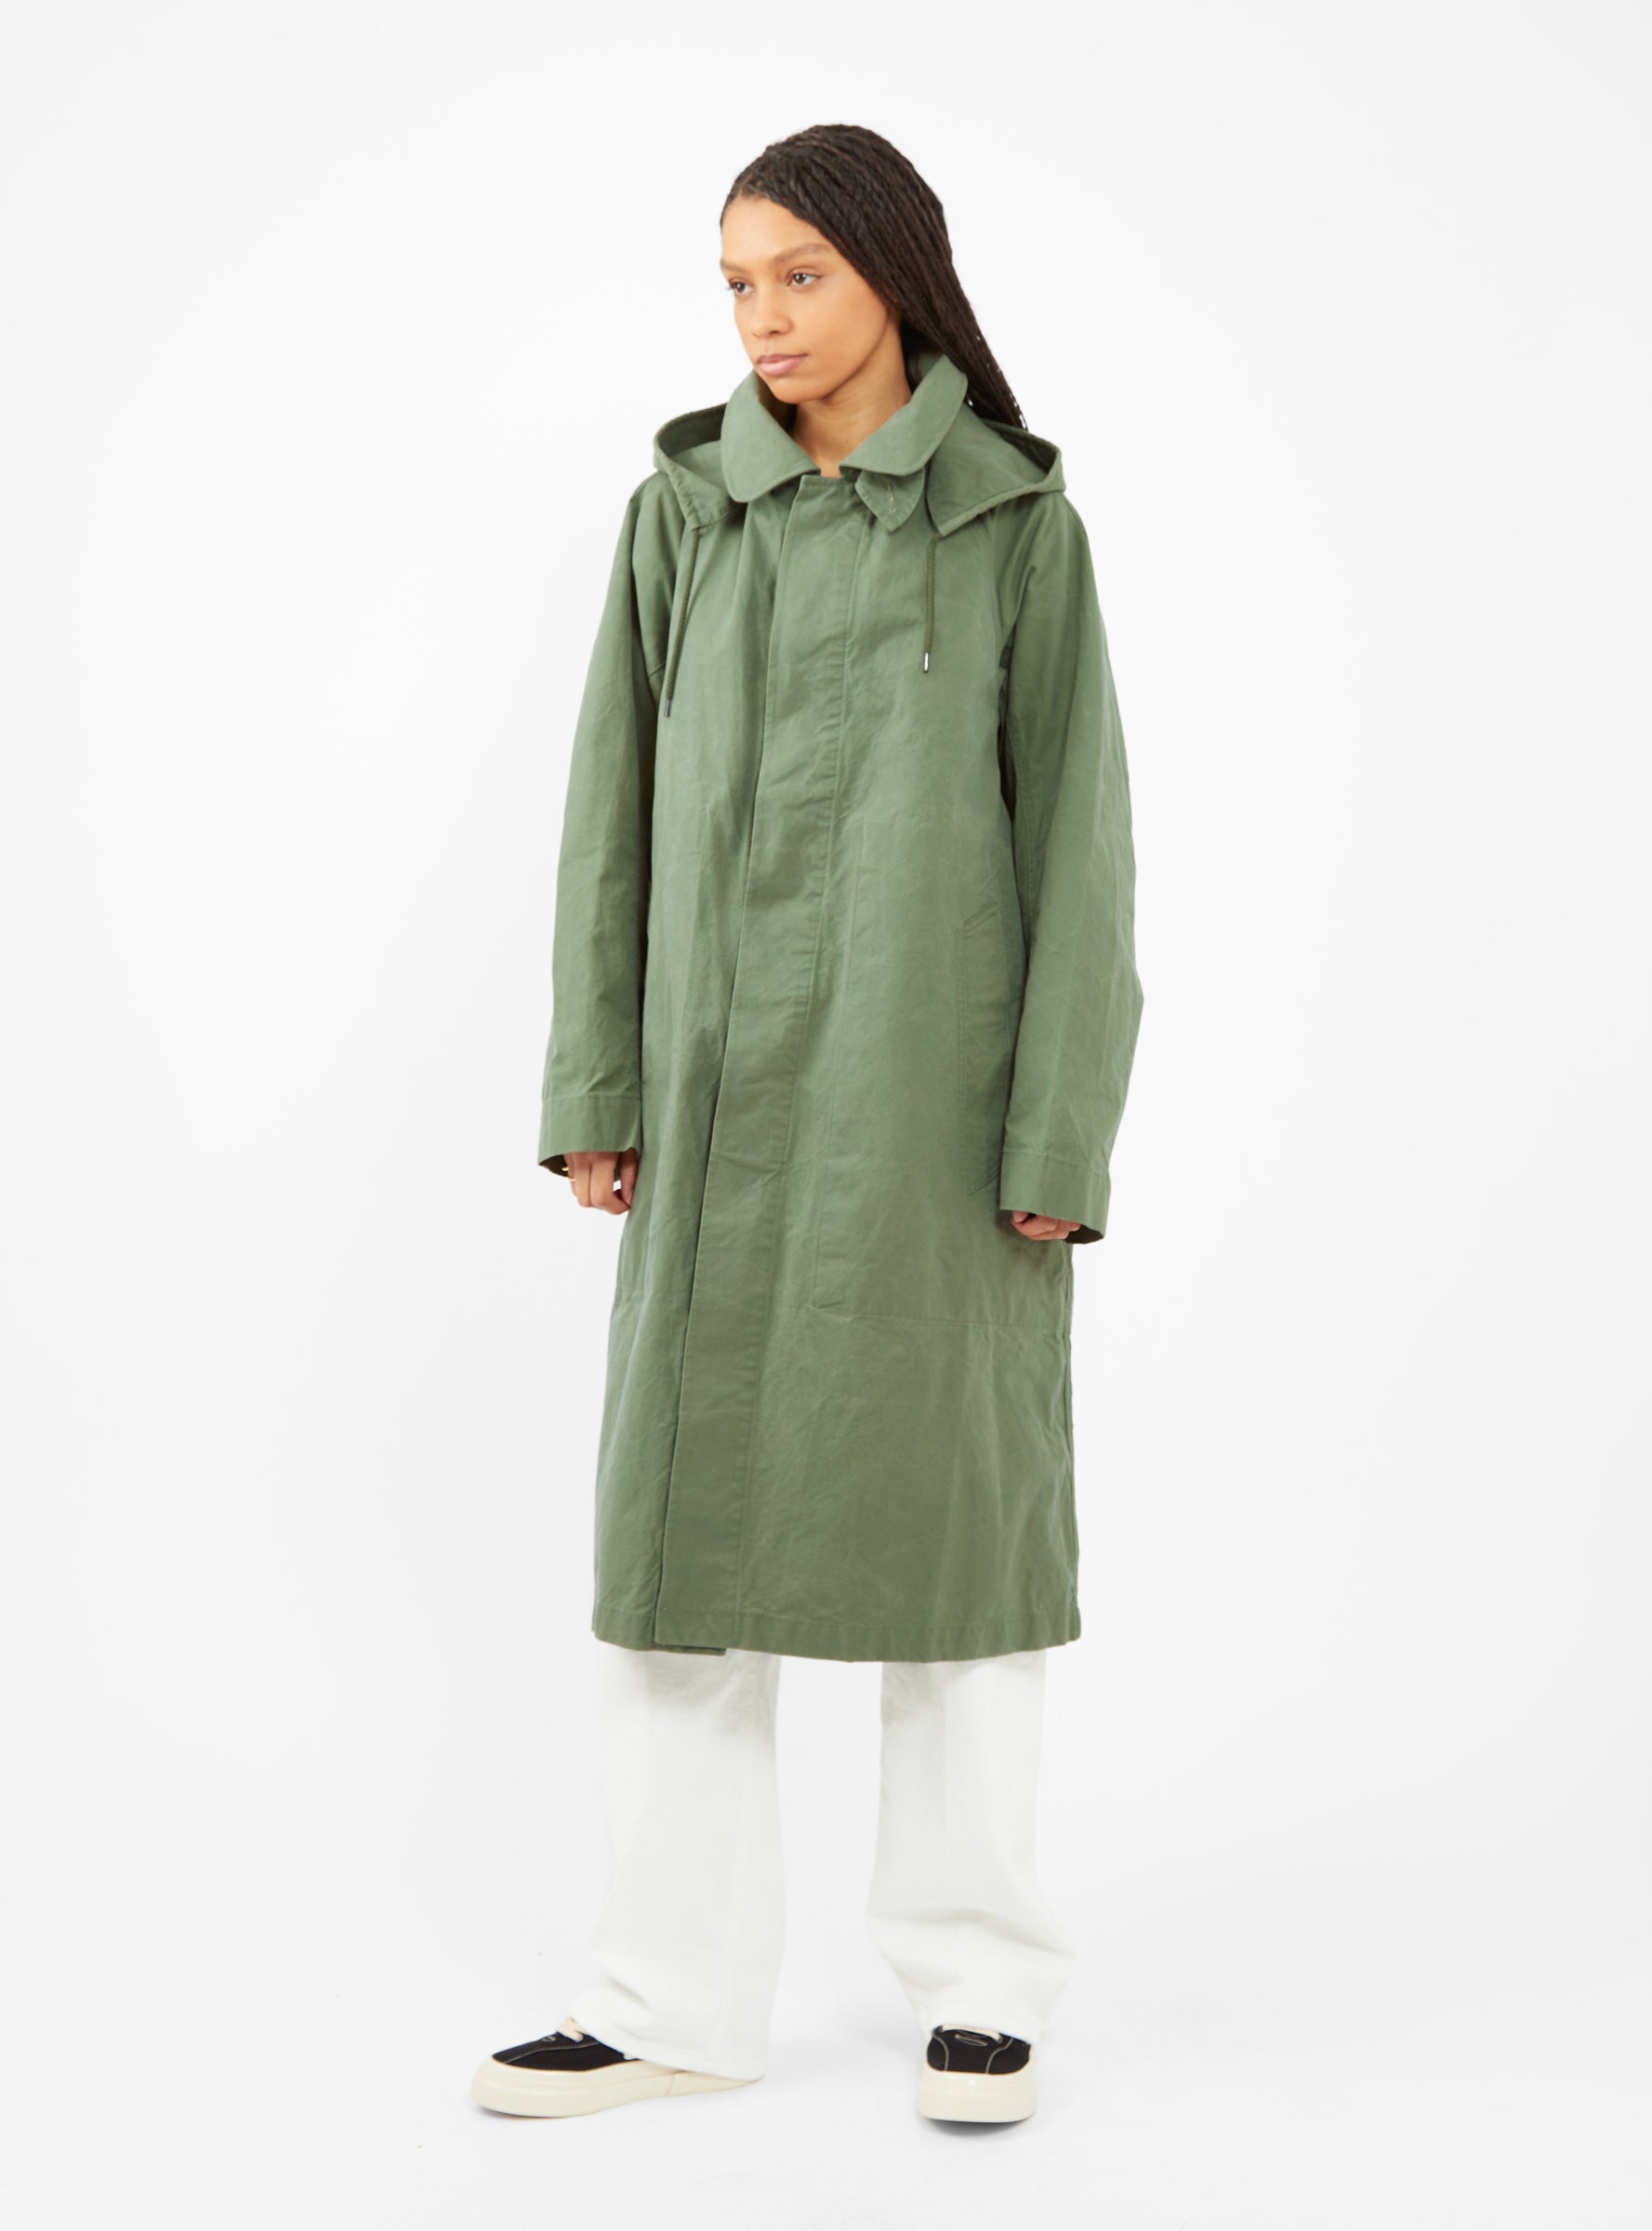 Army Waxed Cotton Trench Coat Marshal Green by Girls of Dust ...